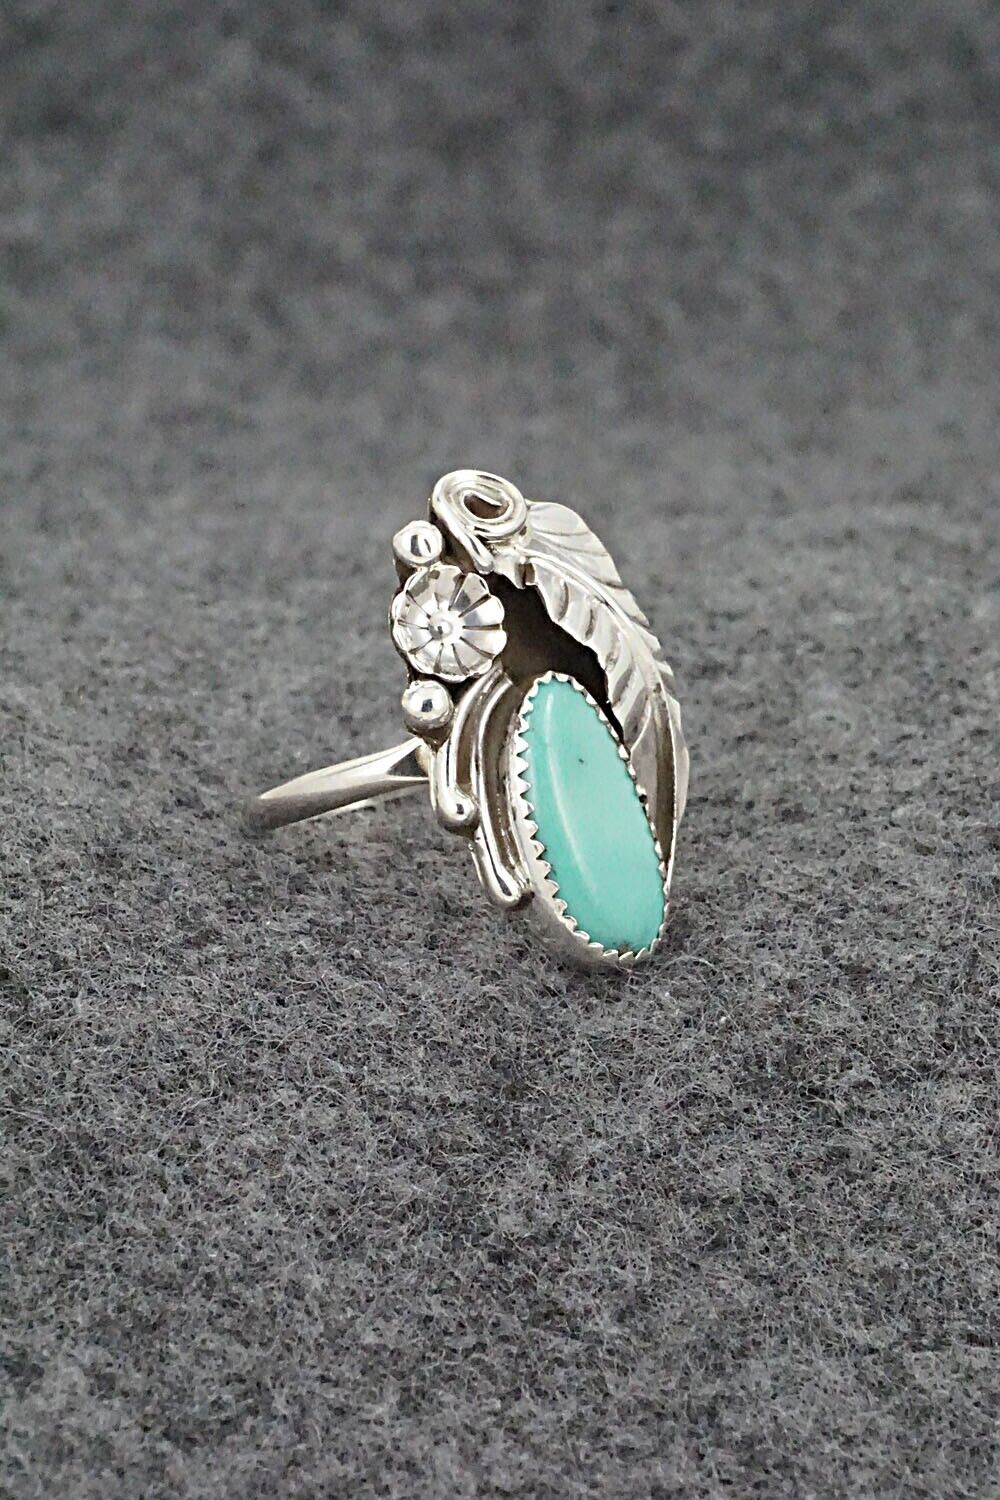 Turquoise & Sterling Silver Ring - Helena Martinez - Size 7.5